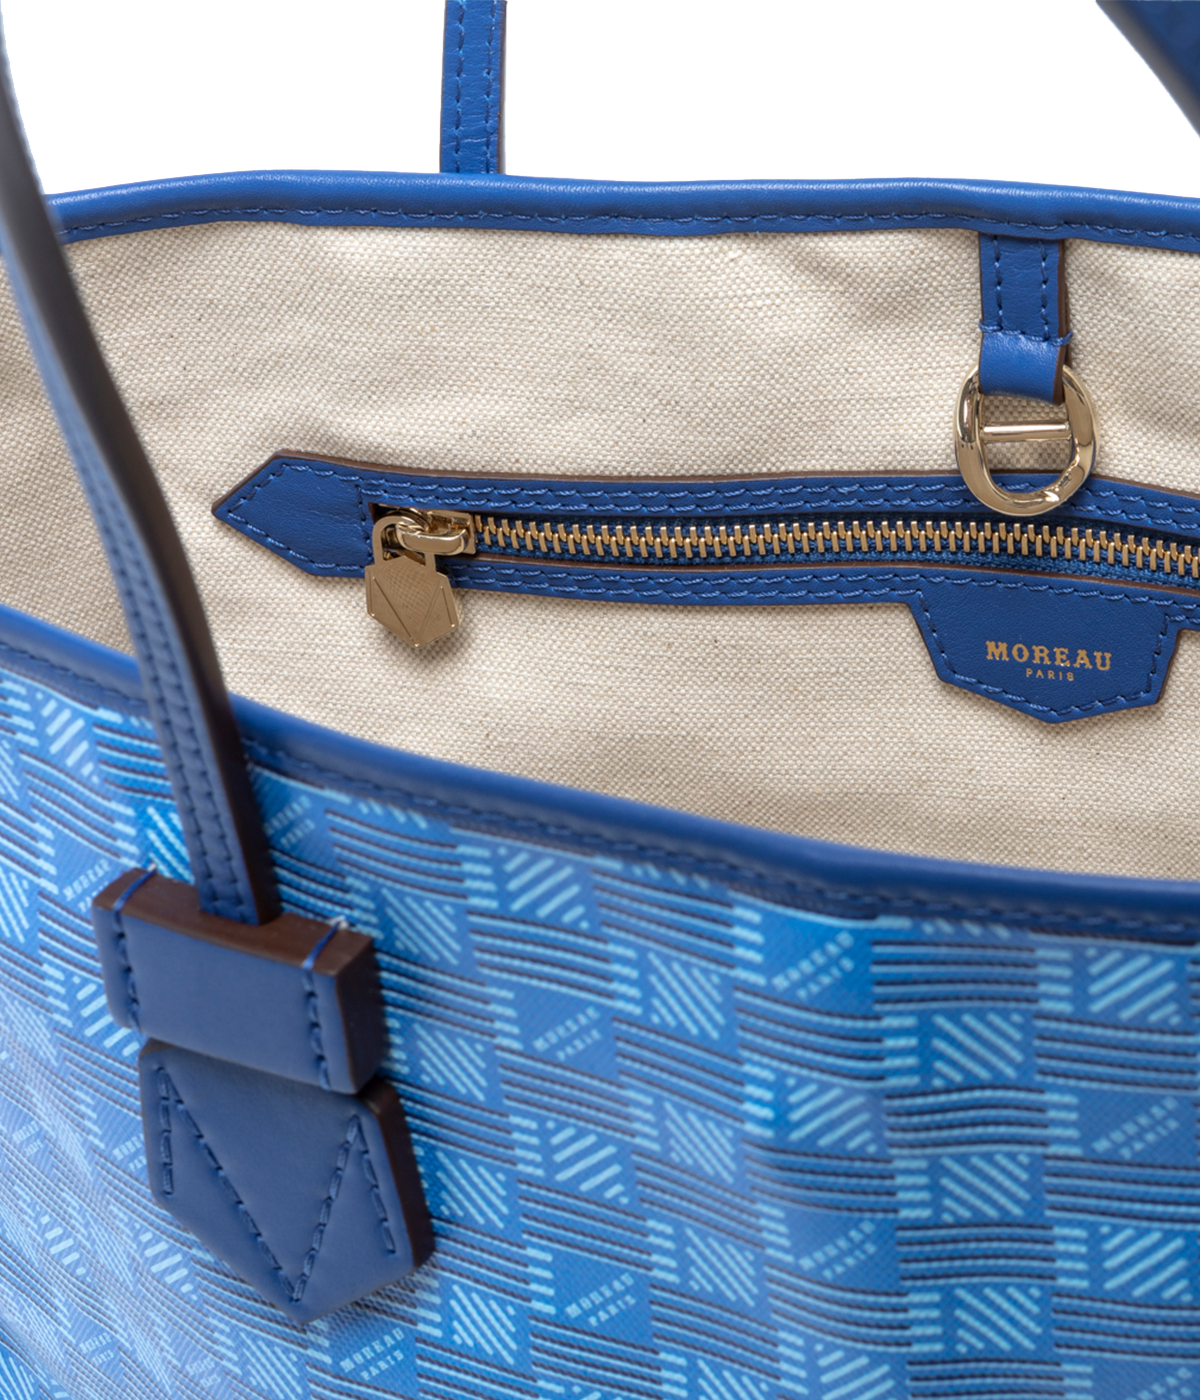 St Tropez GM Tote in Blue & Champagne